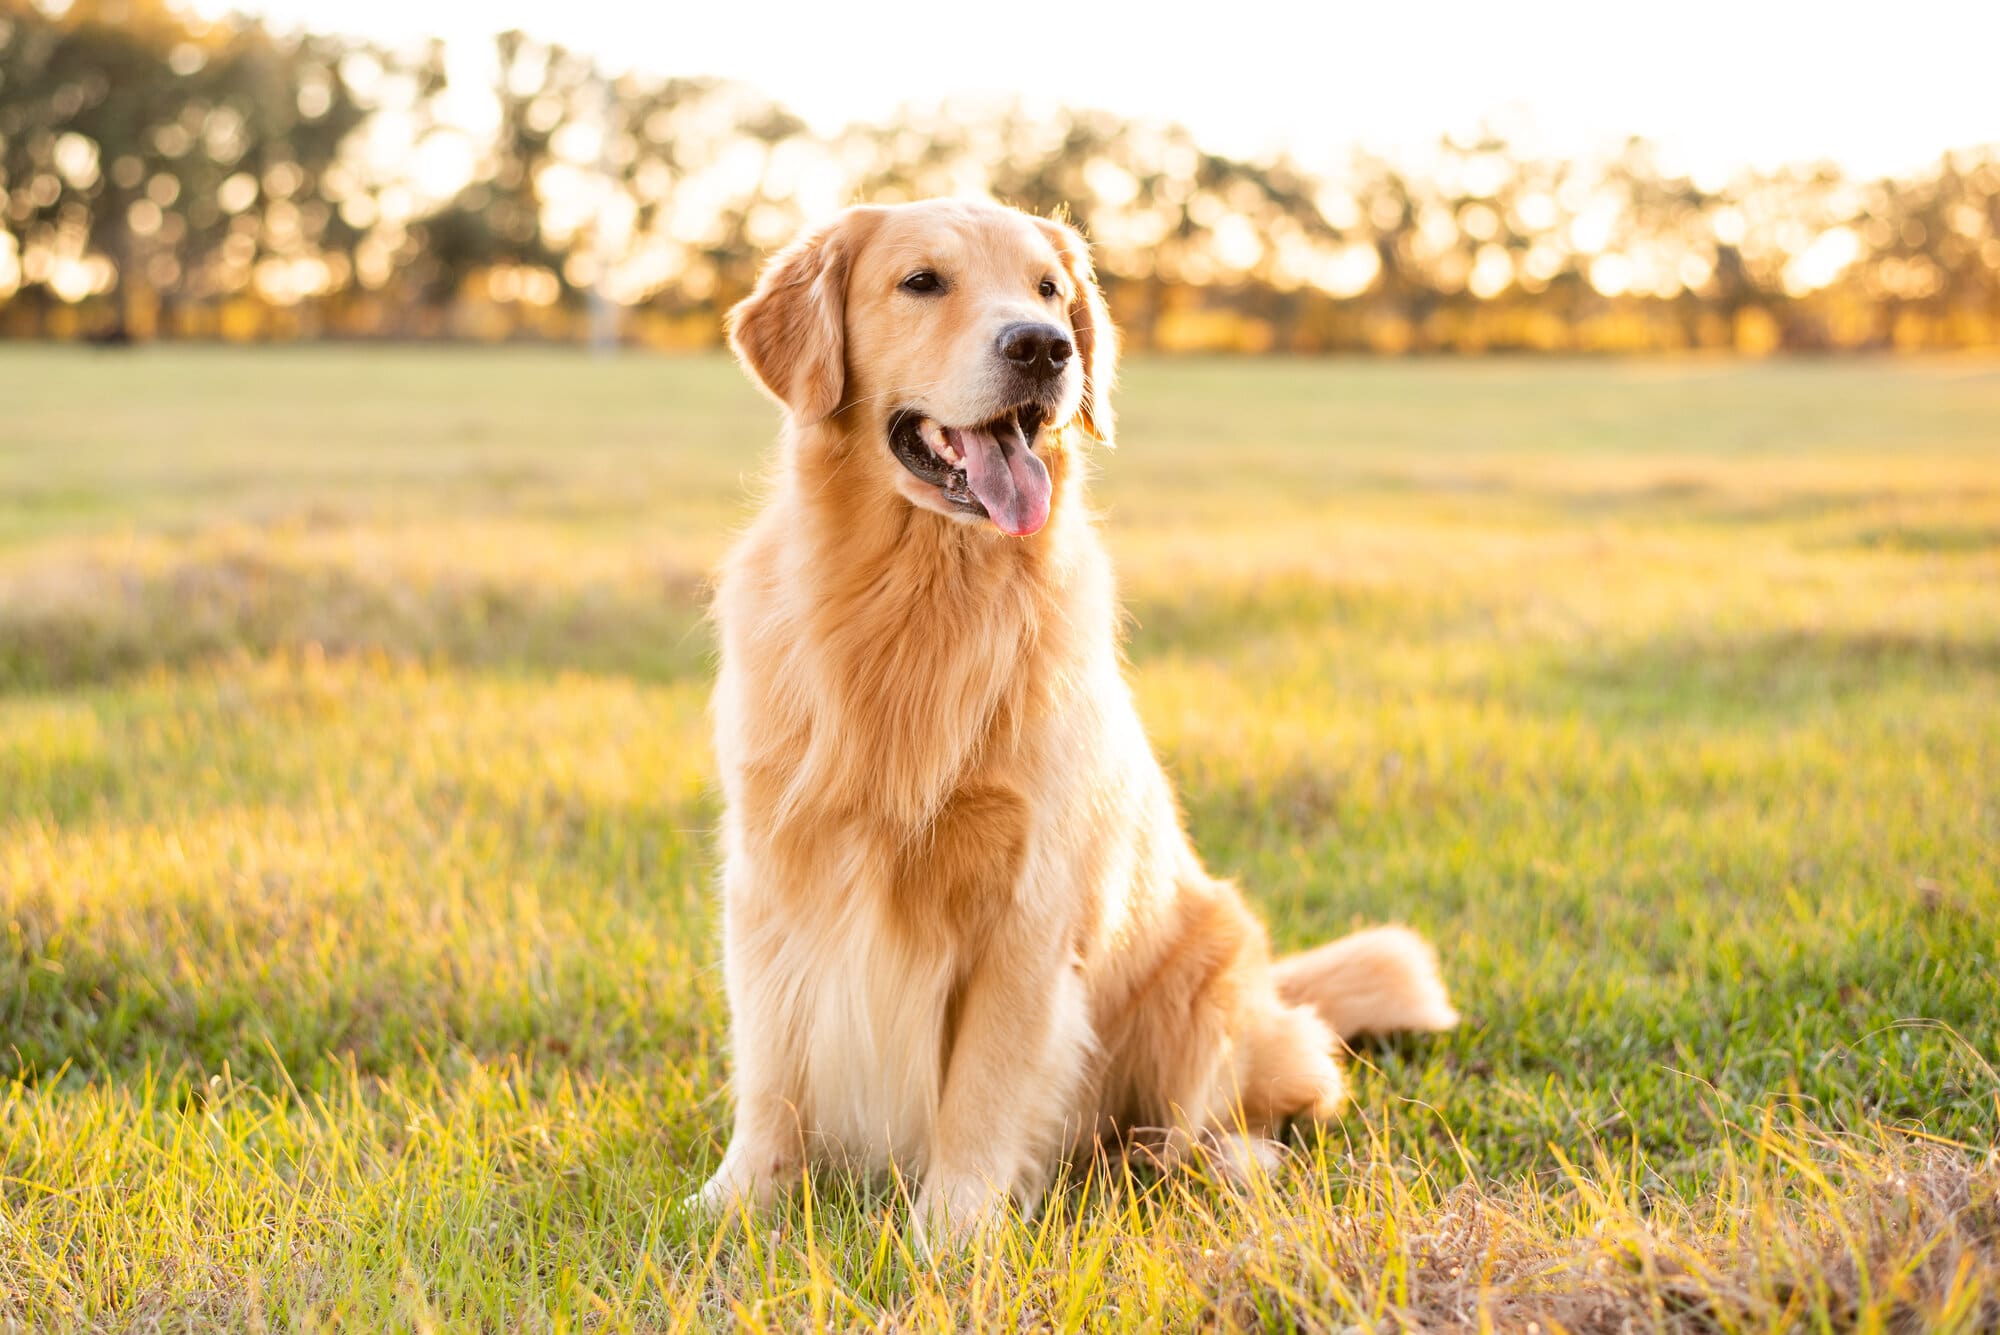 A golden retriever dog citing in a field smiling looking away with golden sun lighting